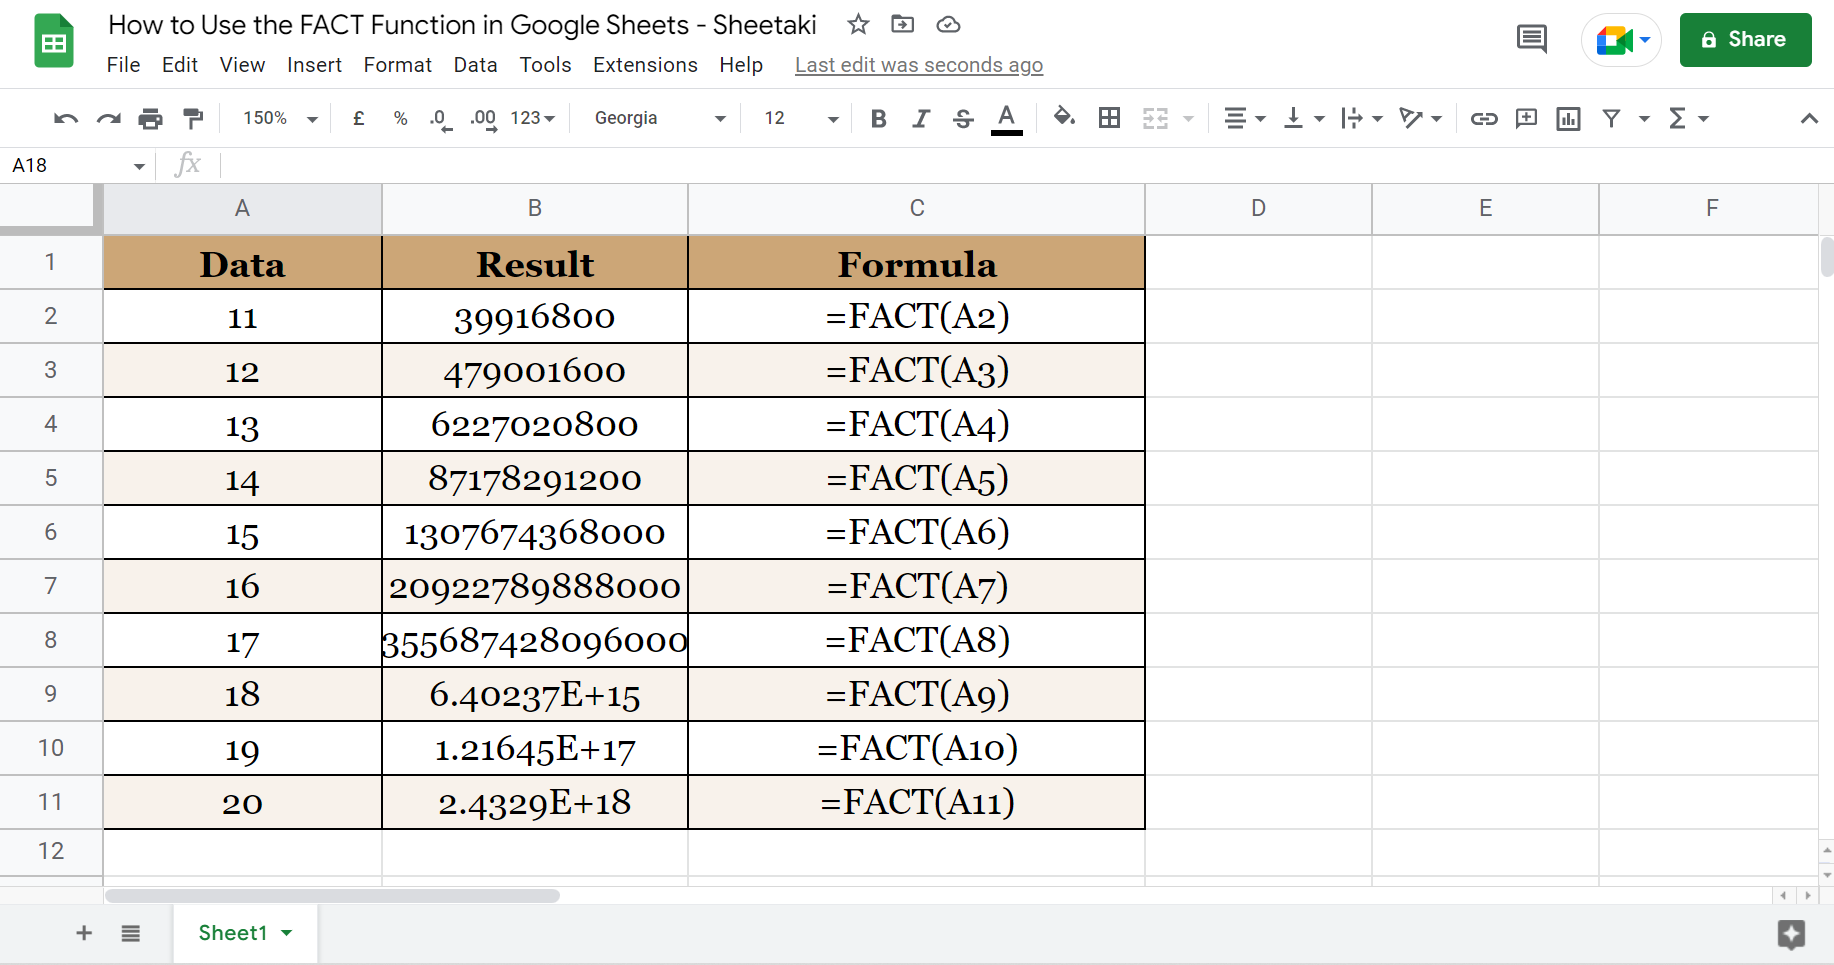 Final output after getting the factorial of each data